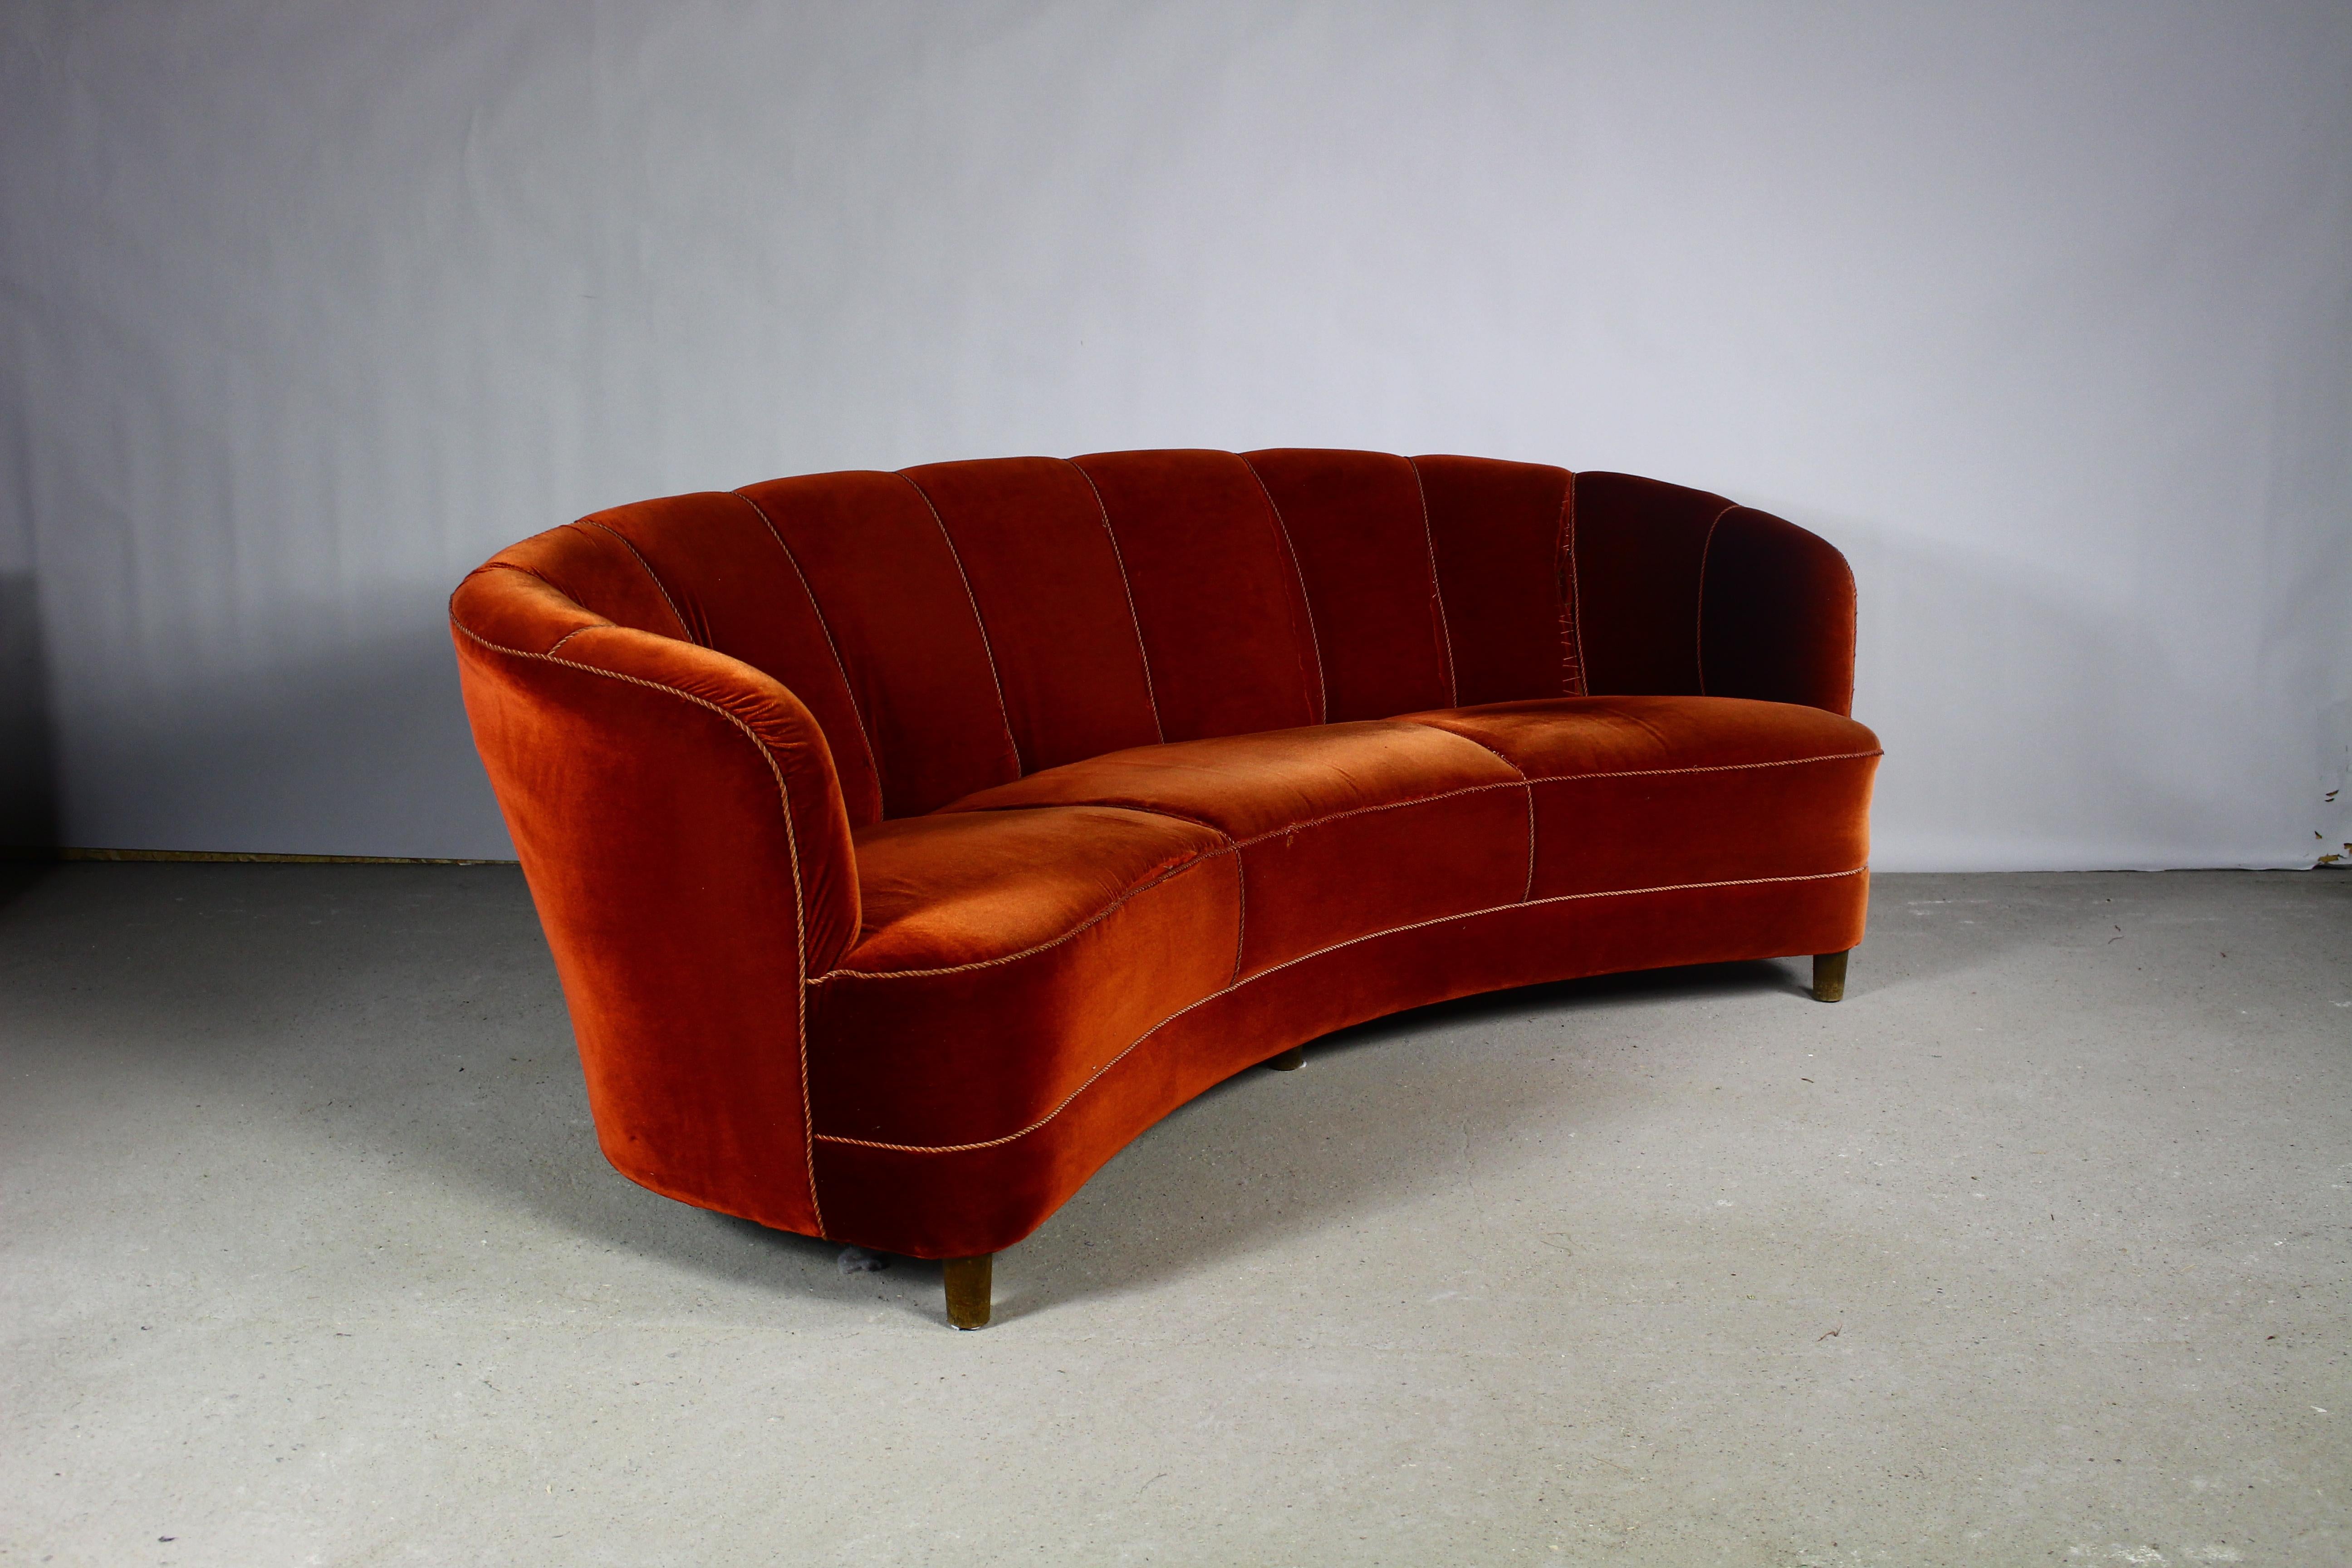 Danish Cabinetmaker Banana Curved Sofa, 1940s.
Banana shaped curved sofa in orange velvet, made in Denmark.
Made in the mid-century modern era.
Recommended upholstery replacement.